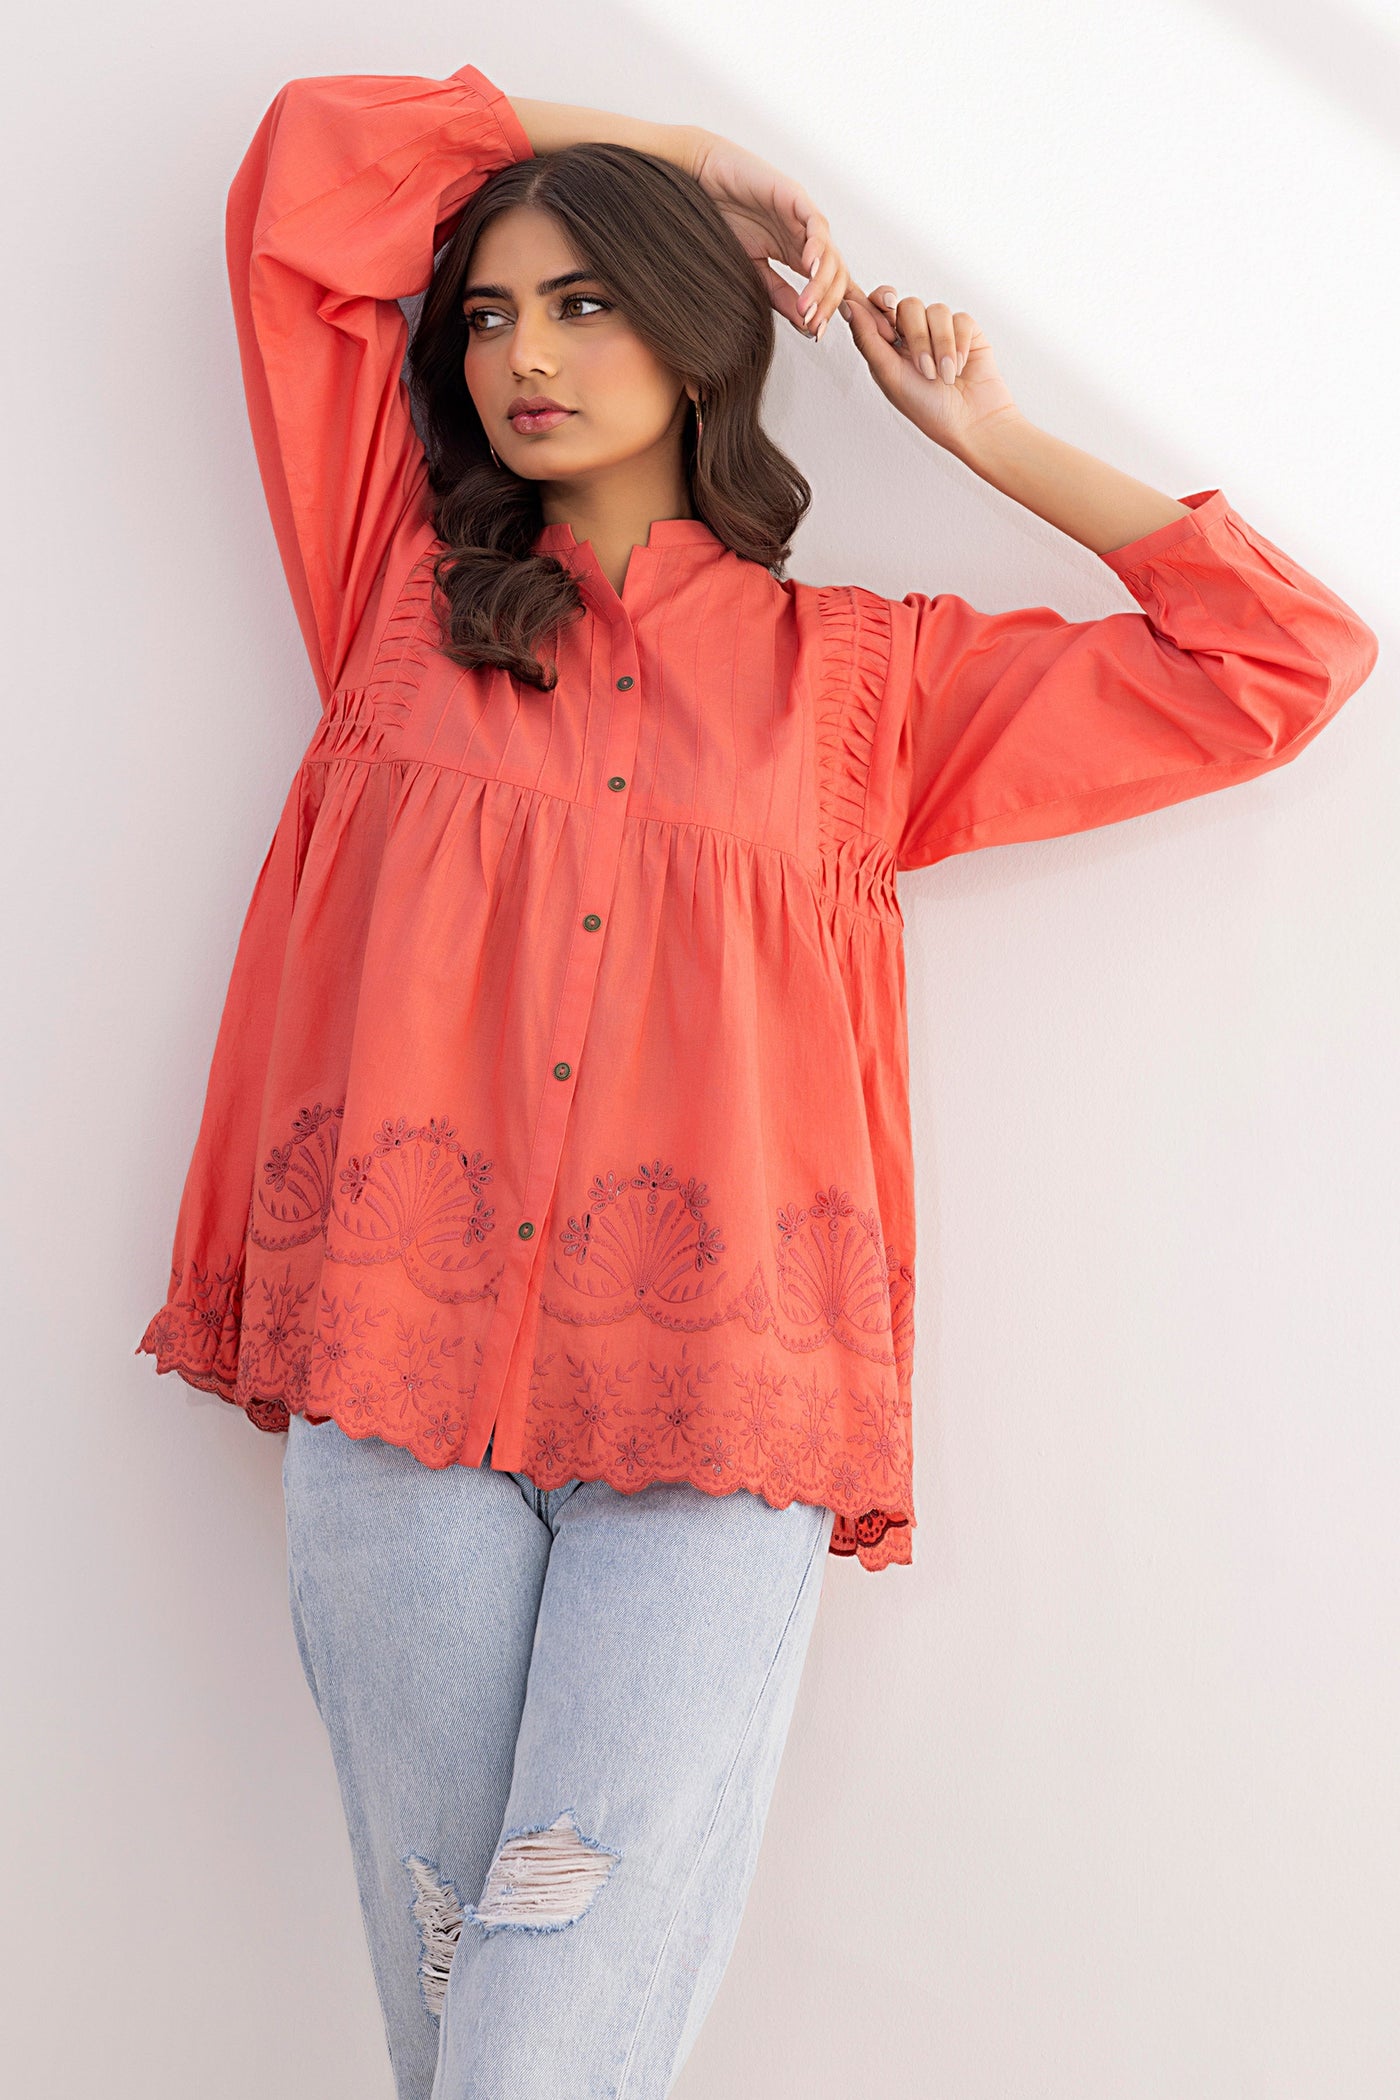 Lakhany 01 Piece Ready to Wear Dyed Embroidered Shirt - LG-SK-0162